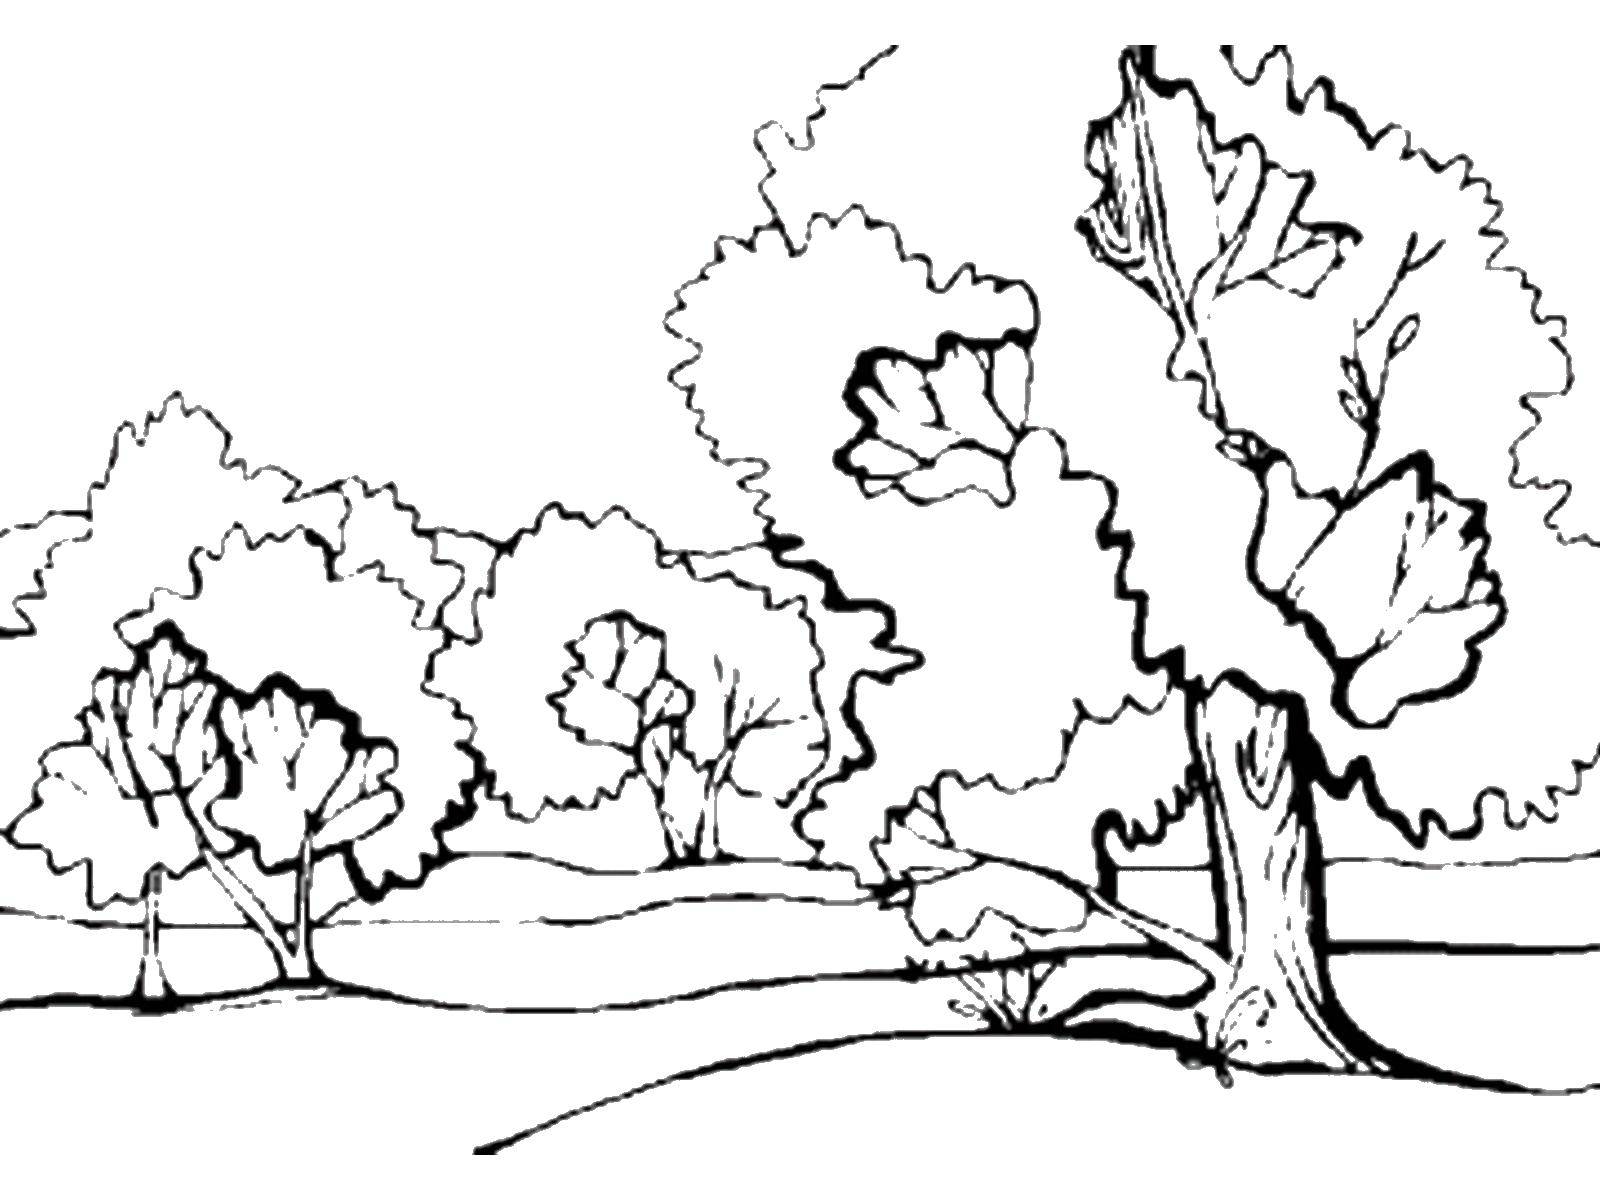 Coloring Trees. Category Nature. Tags:  the trees.